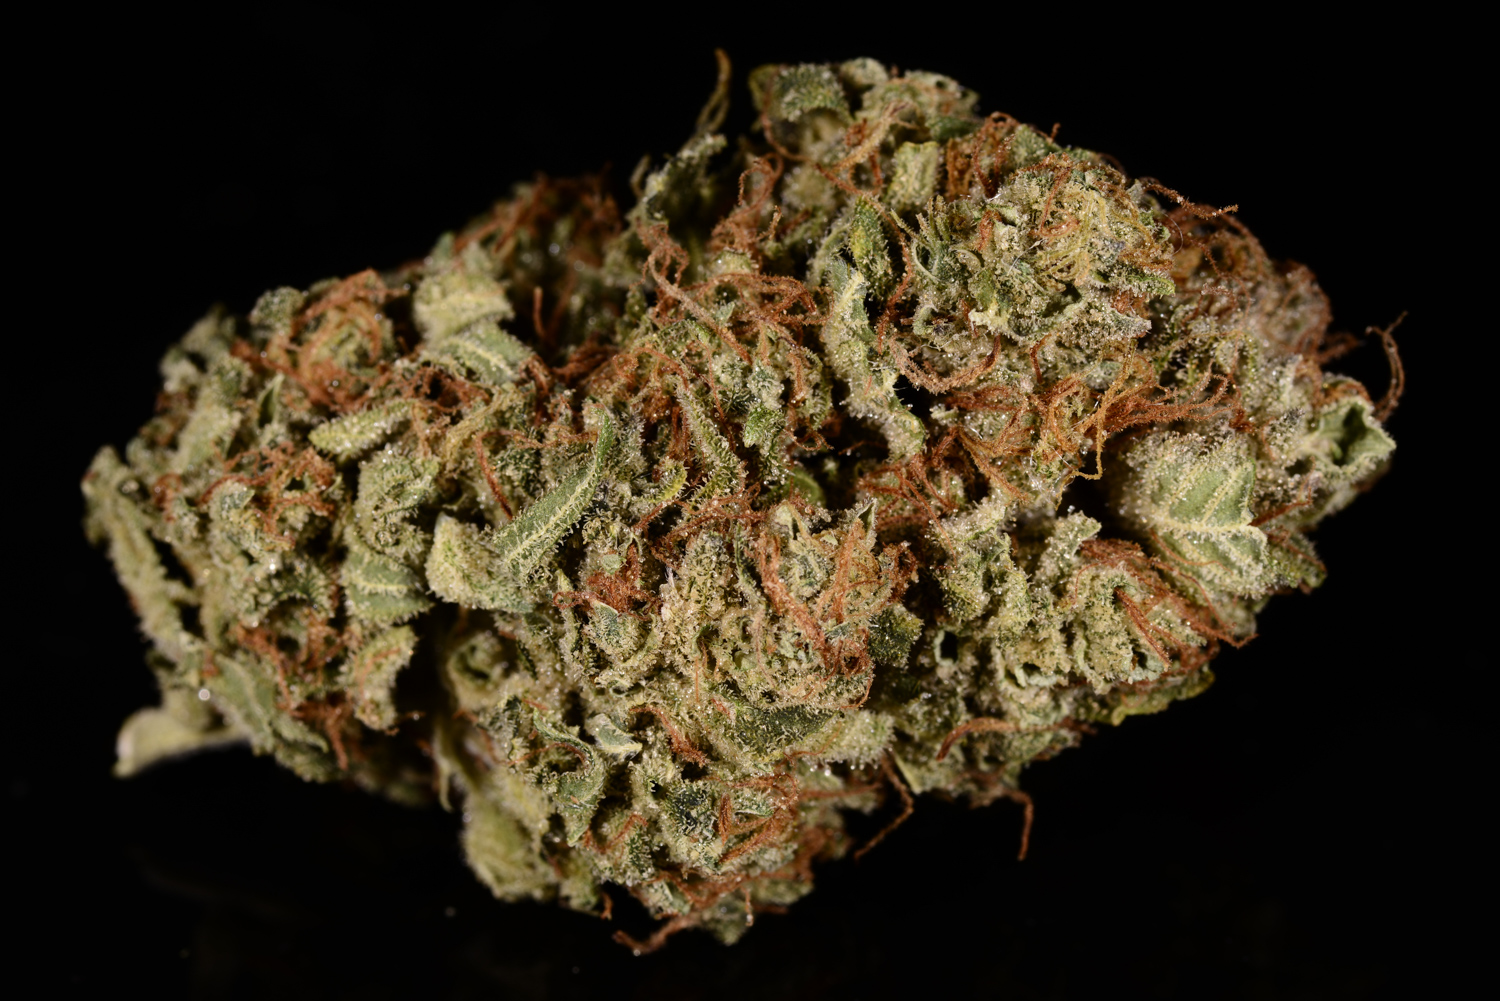 An example of Bio Diesel from a Colorado dispensary. (Ry Prichard, The Cannabist)